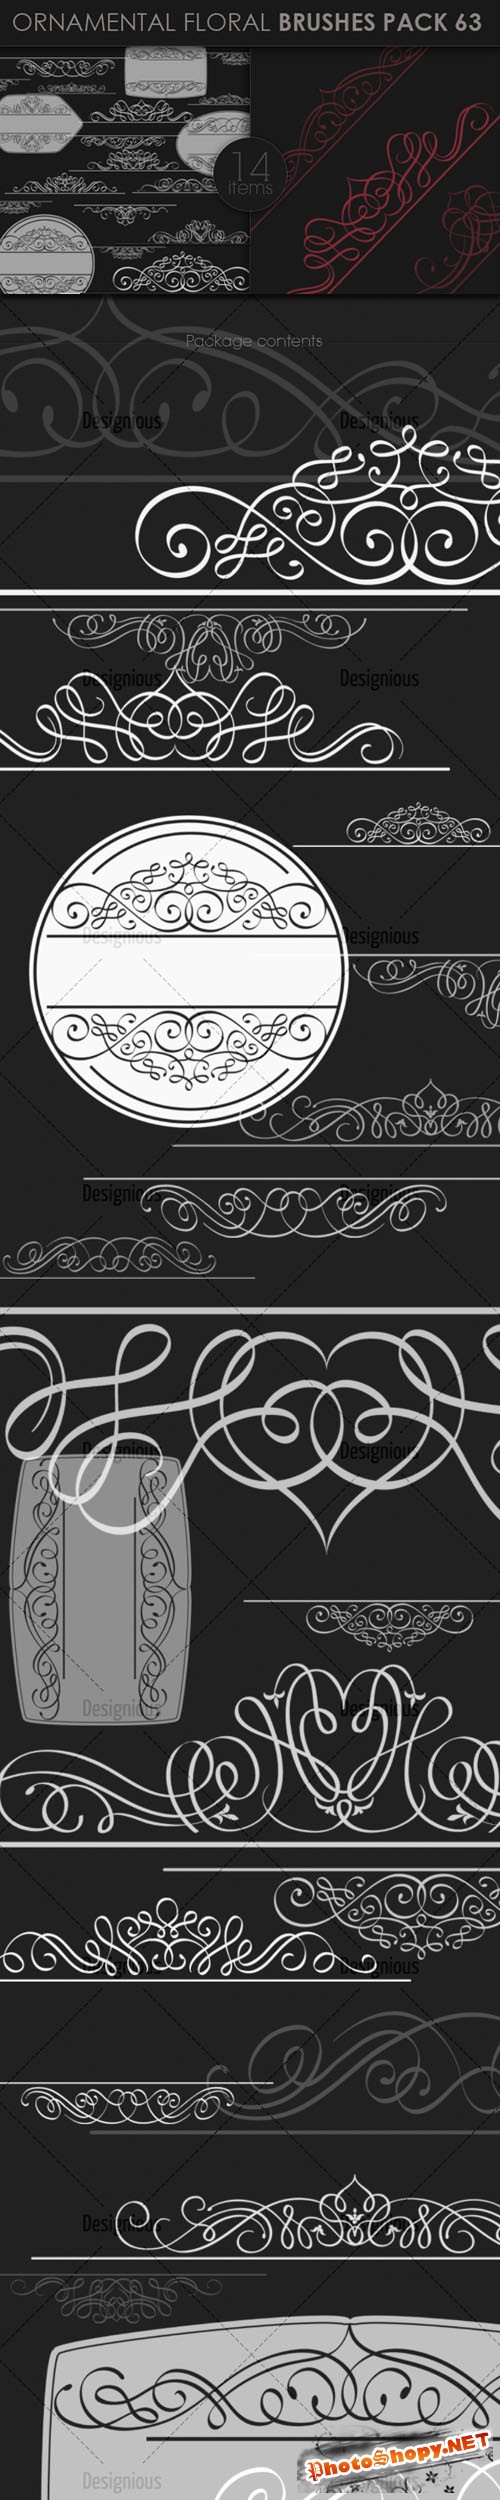 Ornamental Floral Photoshop Brushes Pack 63